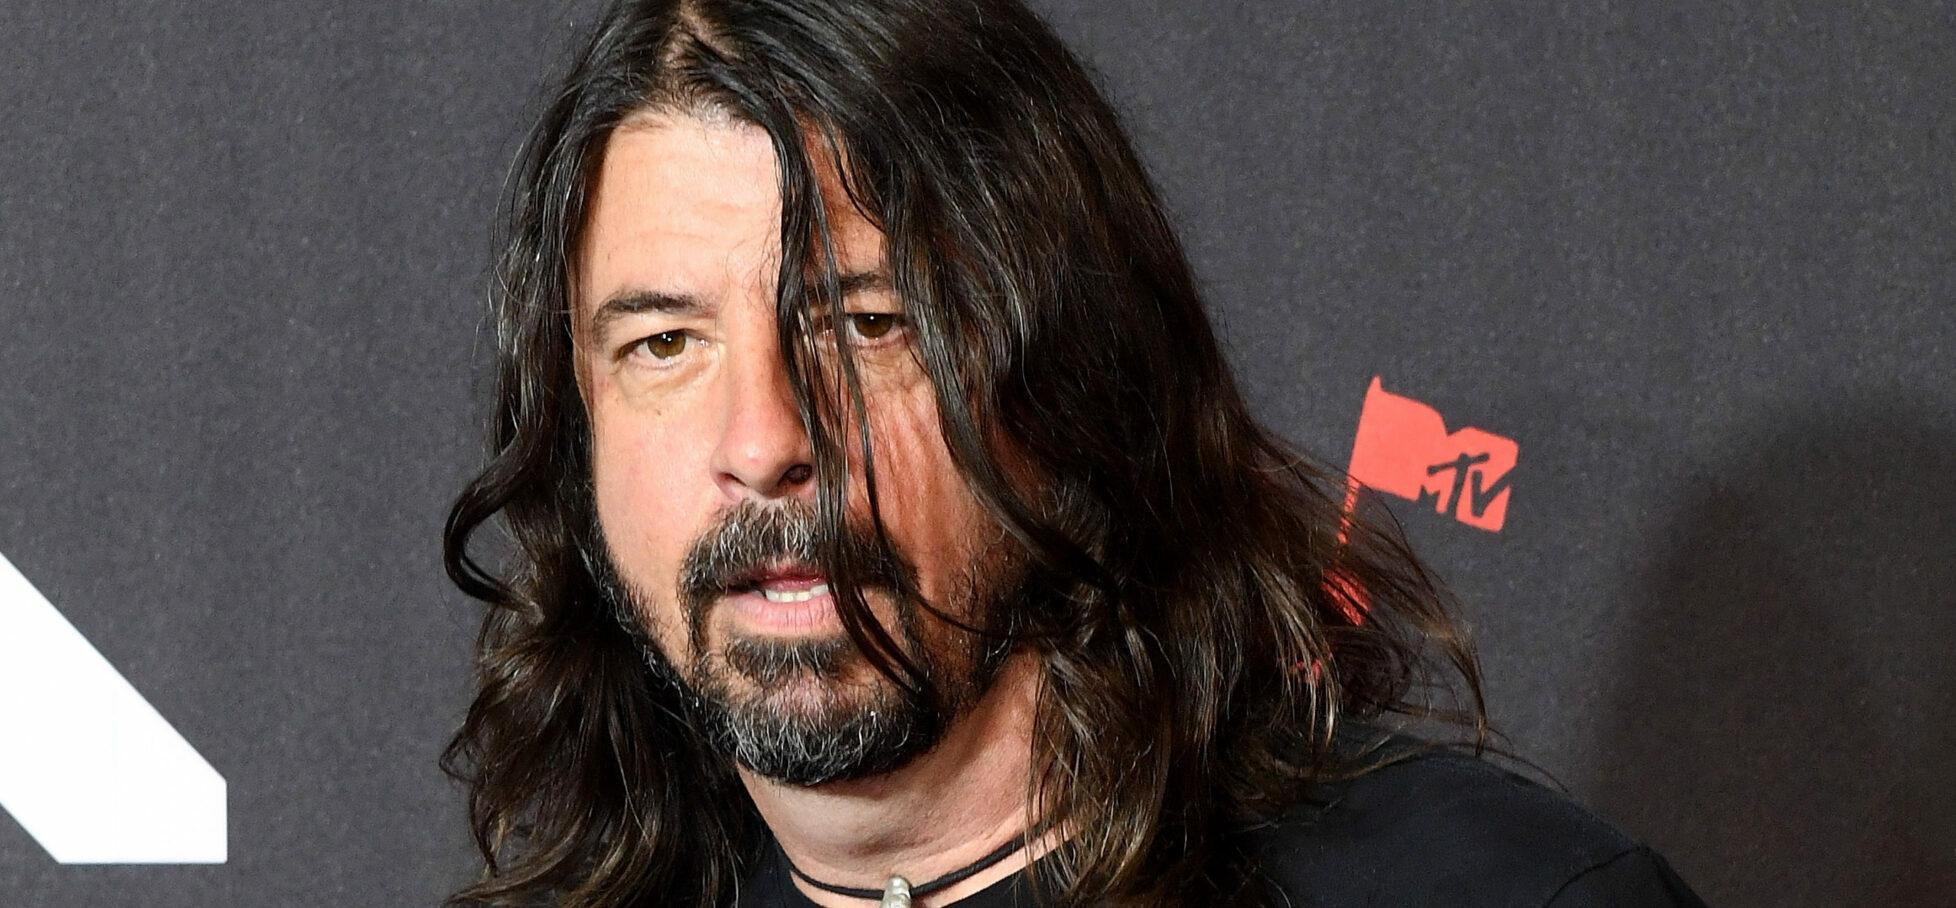 Dave Grohl at the 2021 MTV Video Music Awards - Arrivals